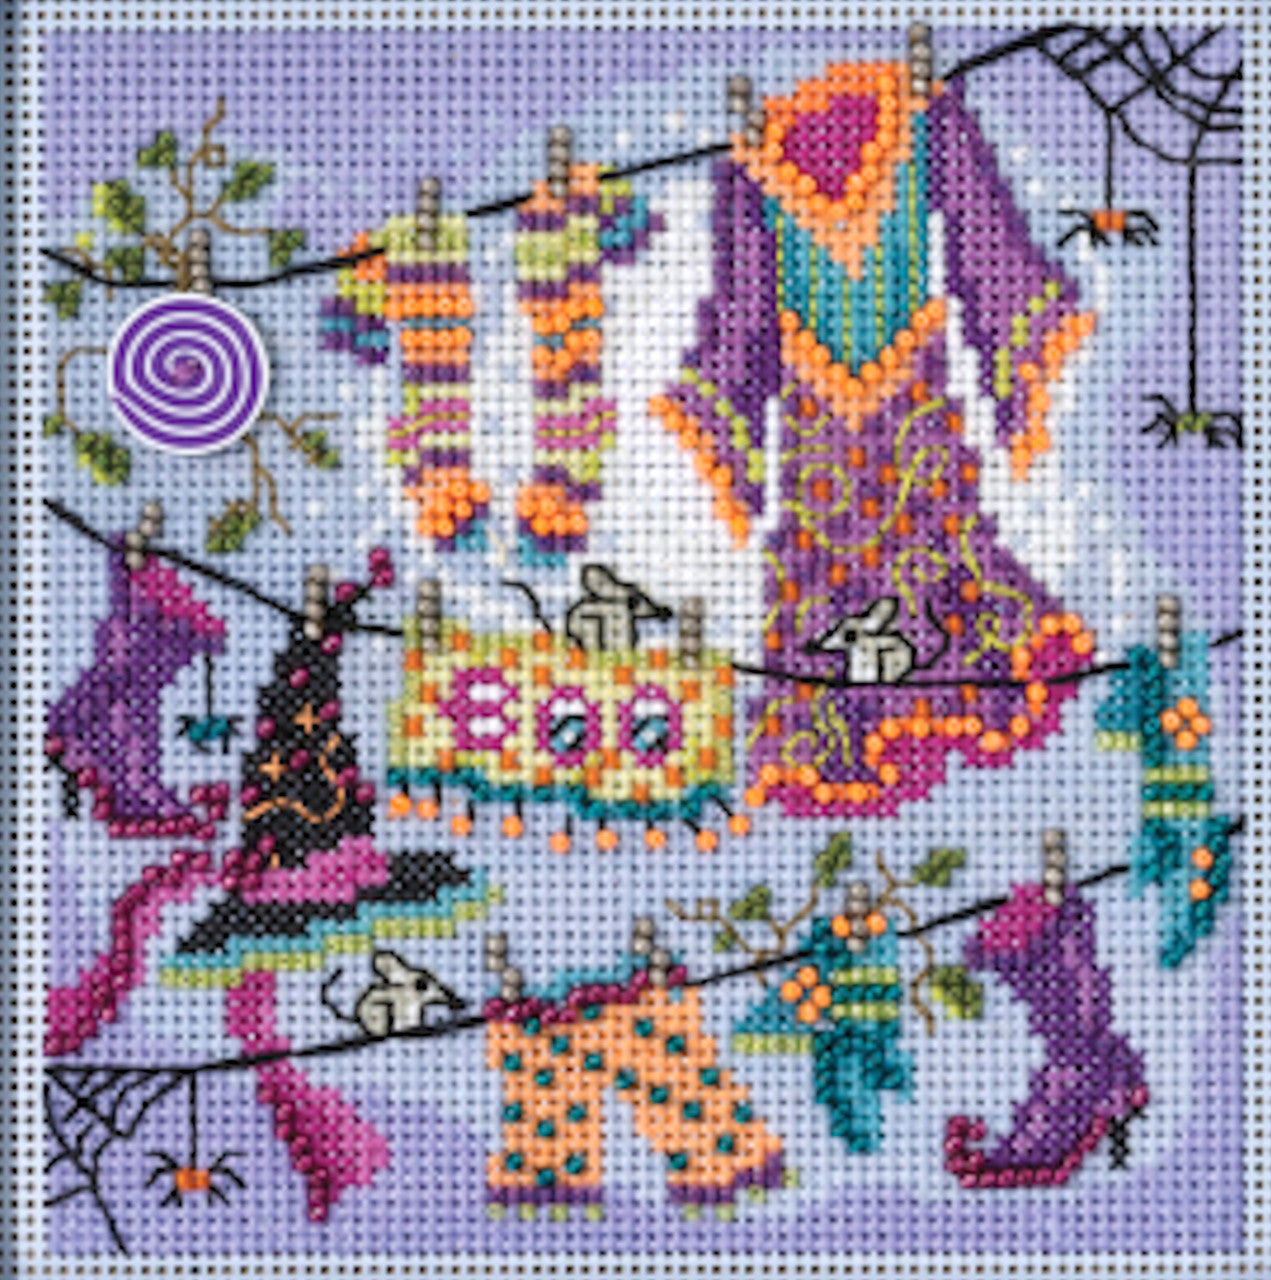 Buttons & Beads - Wanda's Clothesline counted cross stitch kit